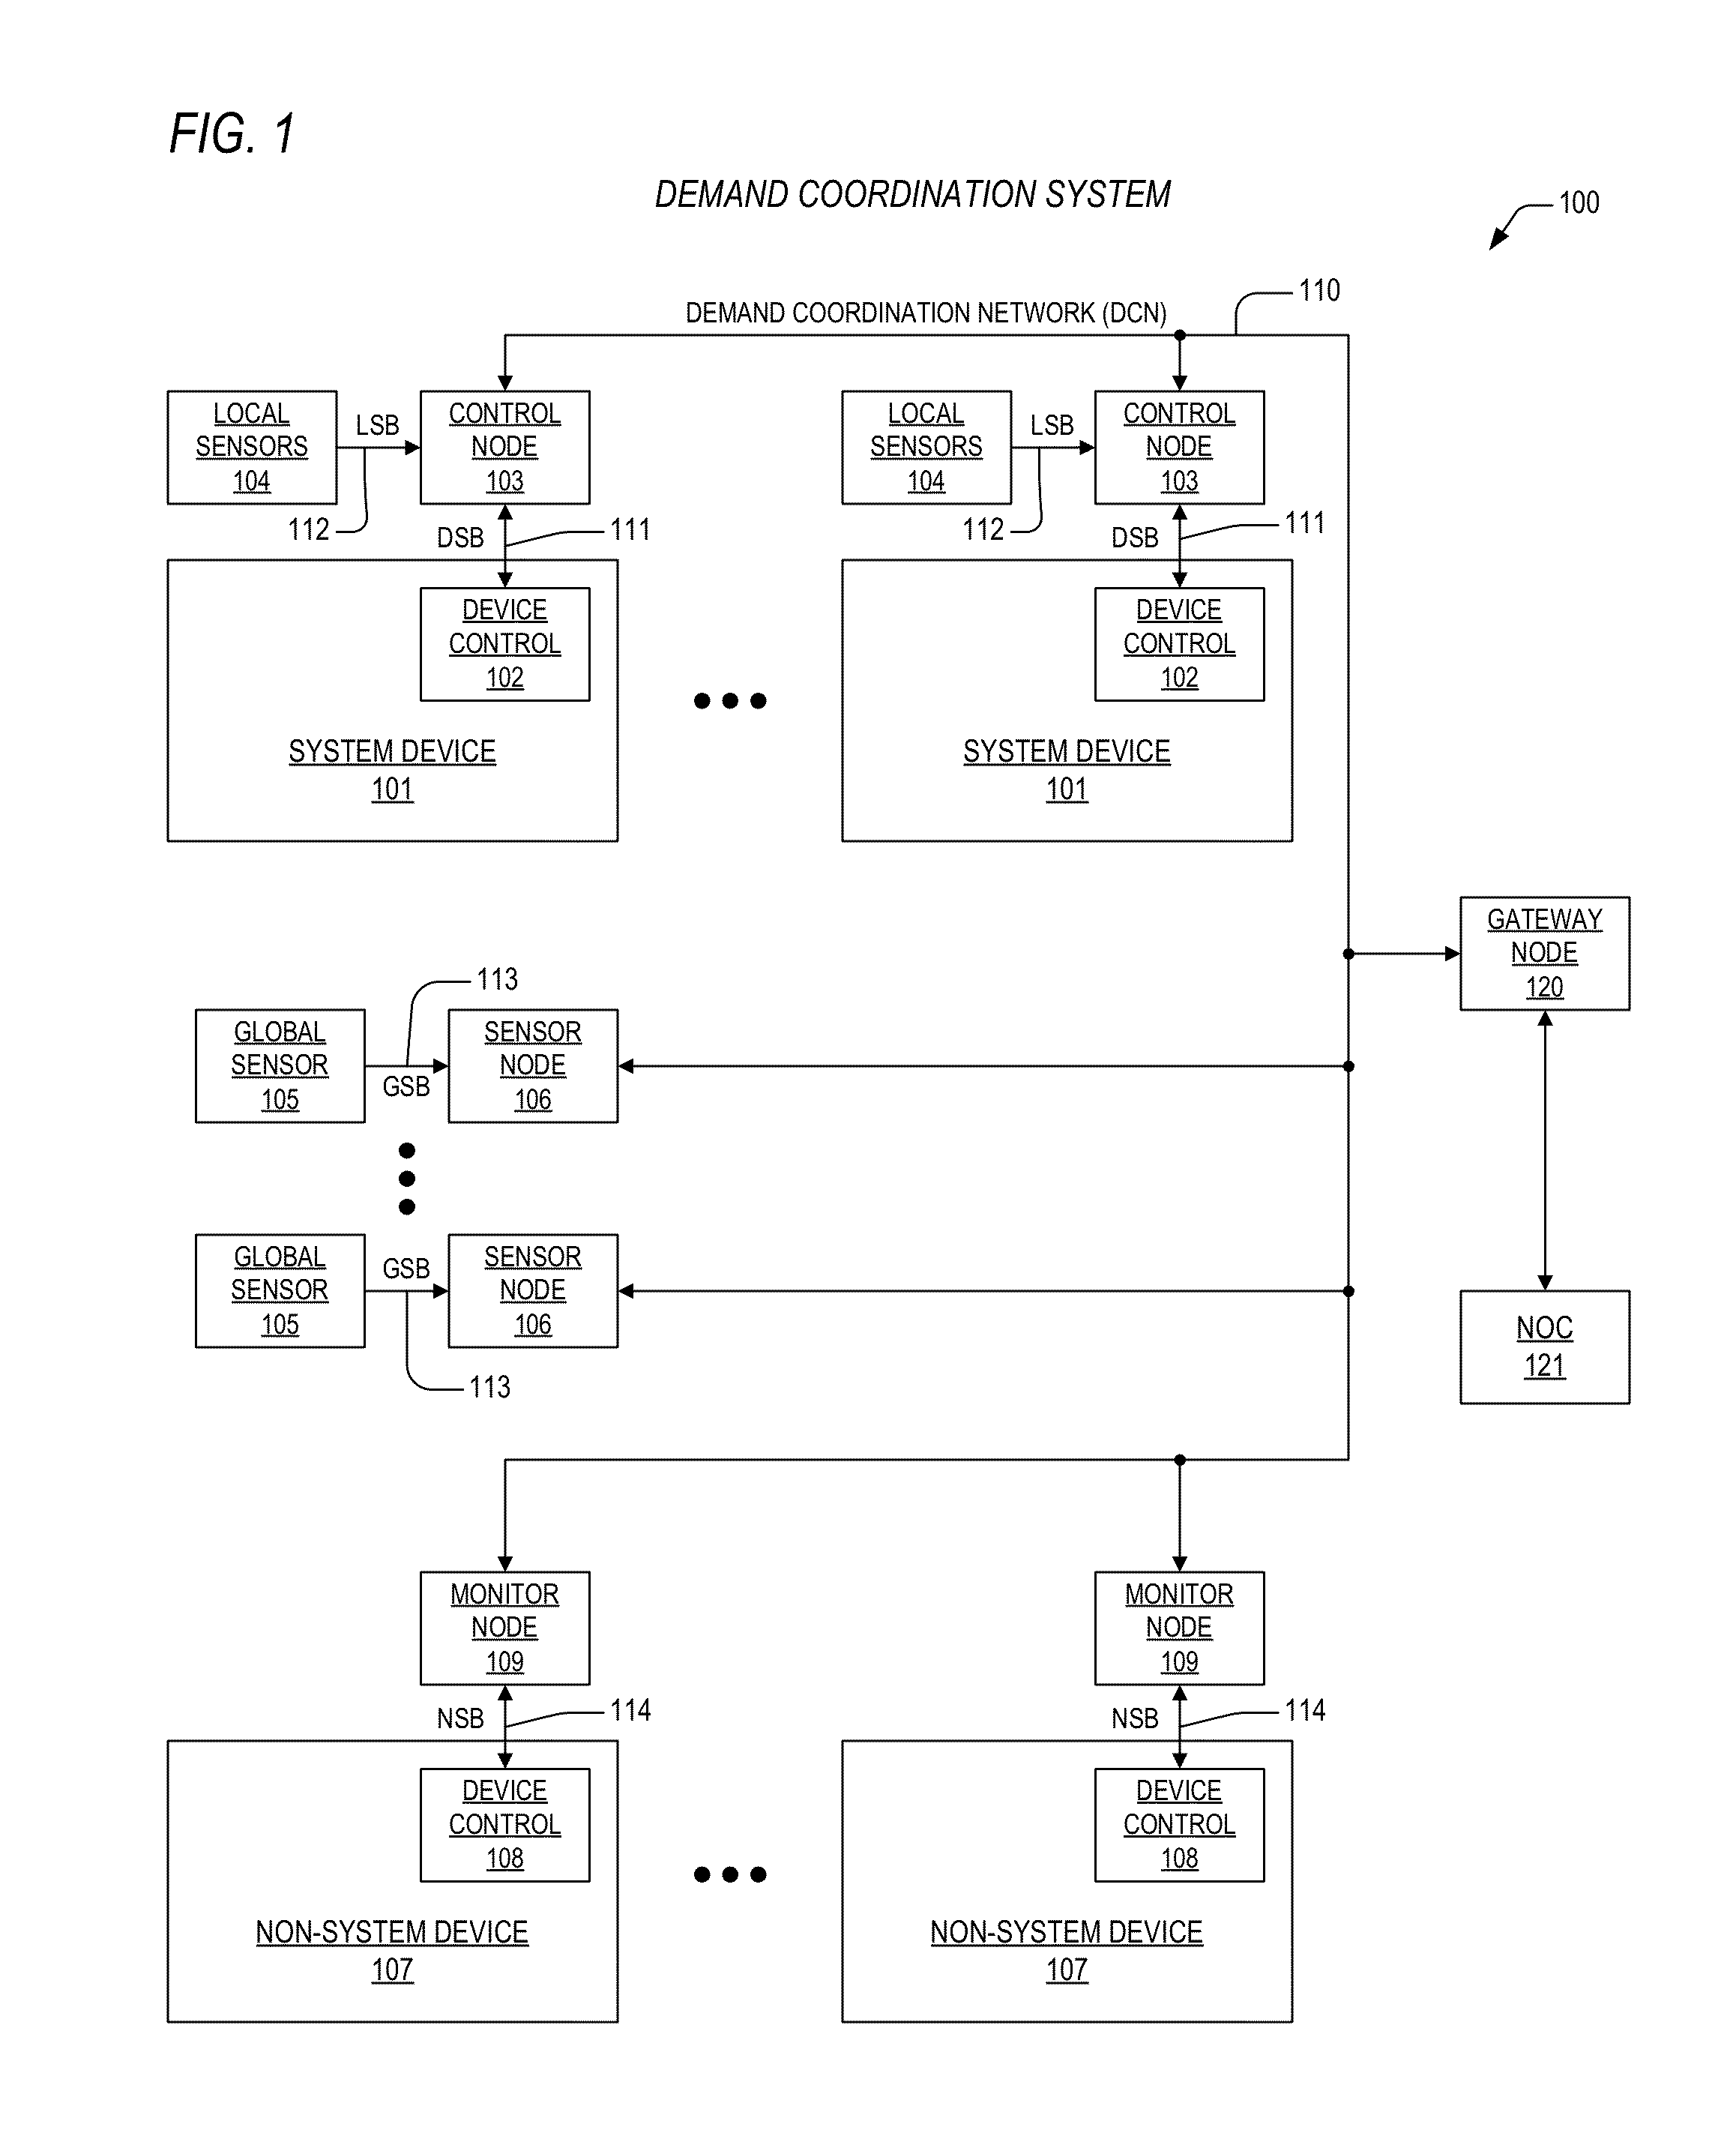 Noc-oriented control of a demand coordination network